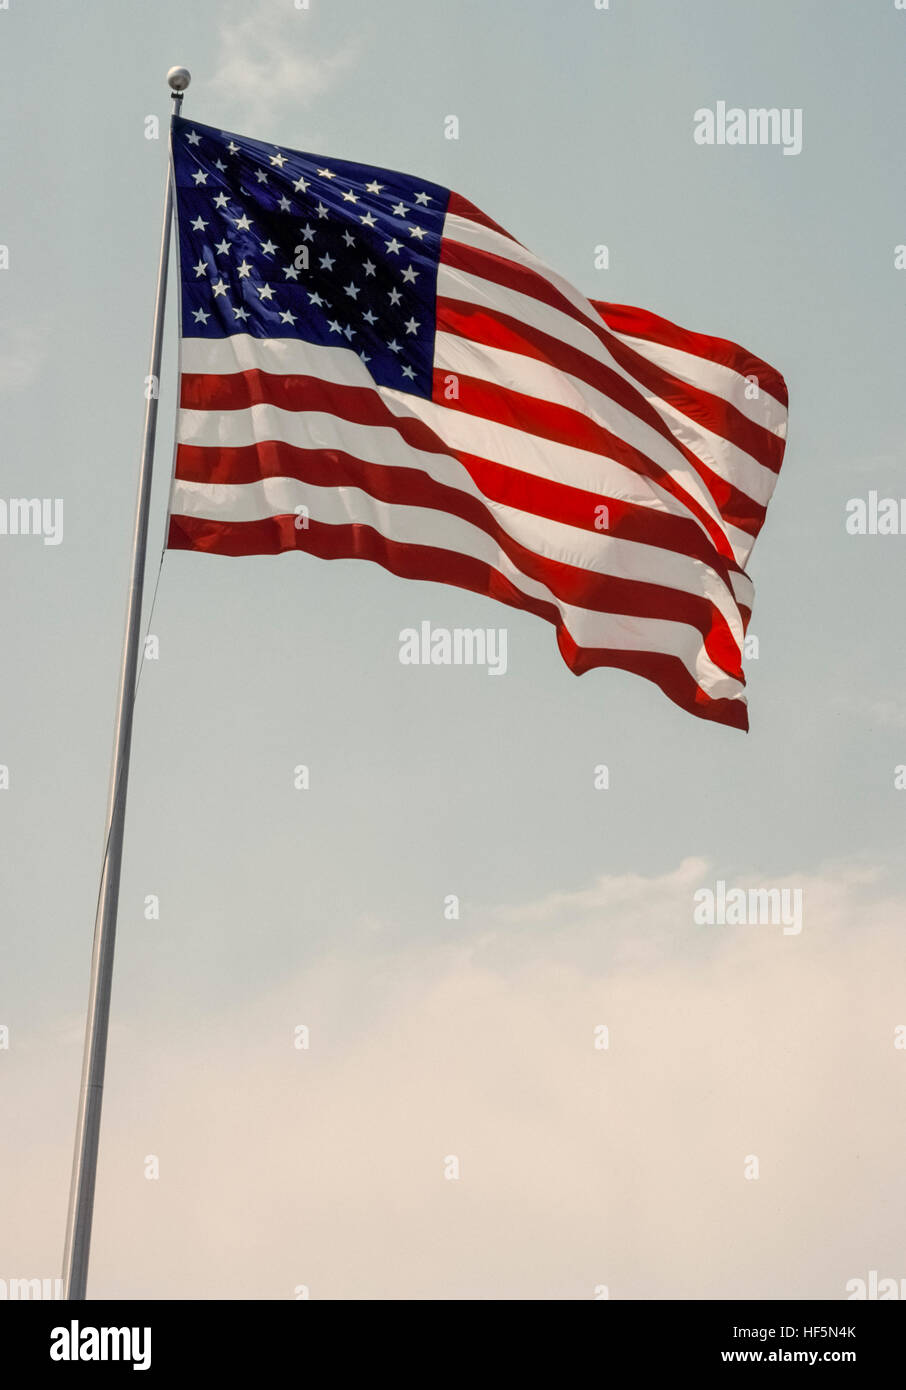 The national flag of the United States of America is known variously as the American flag, The Stars and Stripes, Old Glory, and The Star-Spangled Banner. The 50 five-pointed small white stars on a blue rectangular field represent the the 50 states of the U.S.A., while the 13 alternating red and white horizontal stripes represent the 13 British colonies in America that declared independence from Great Britain. Adopted in 1960, this is the 27th version of the U.S. flag that was first designed in 1777. Stock Photo